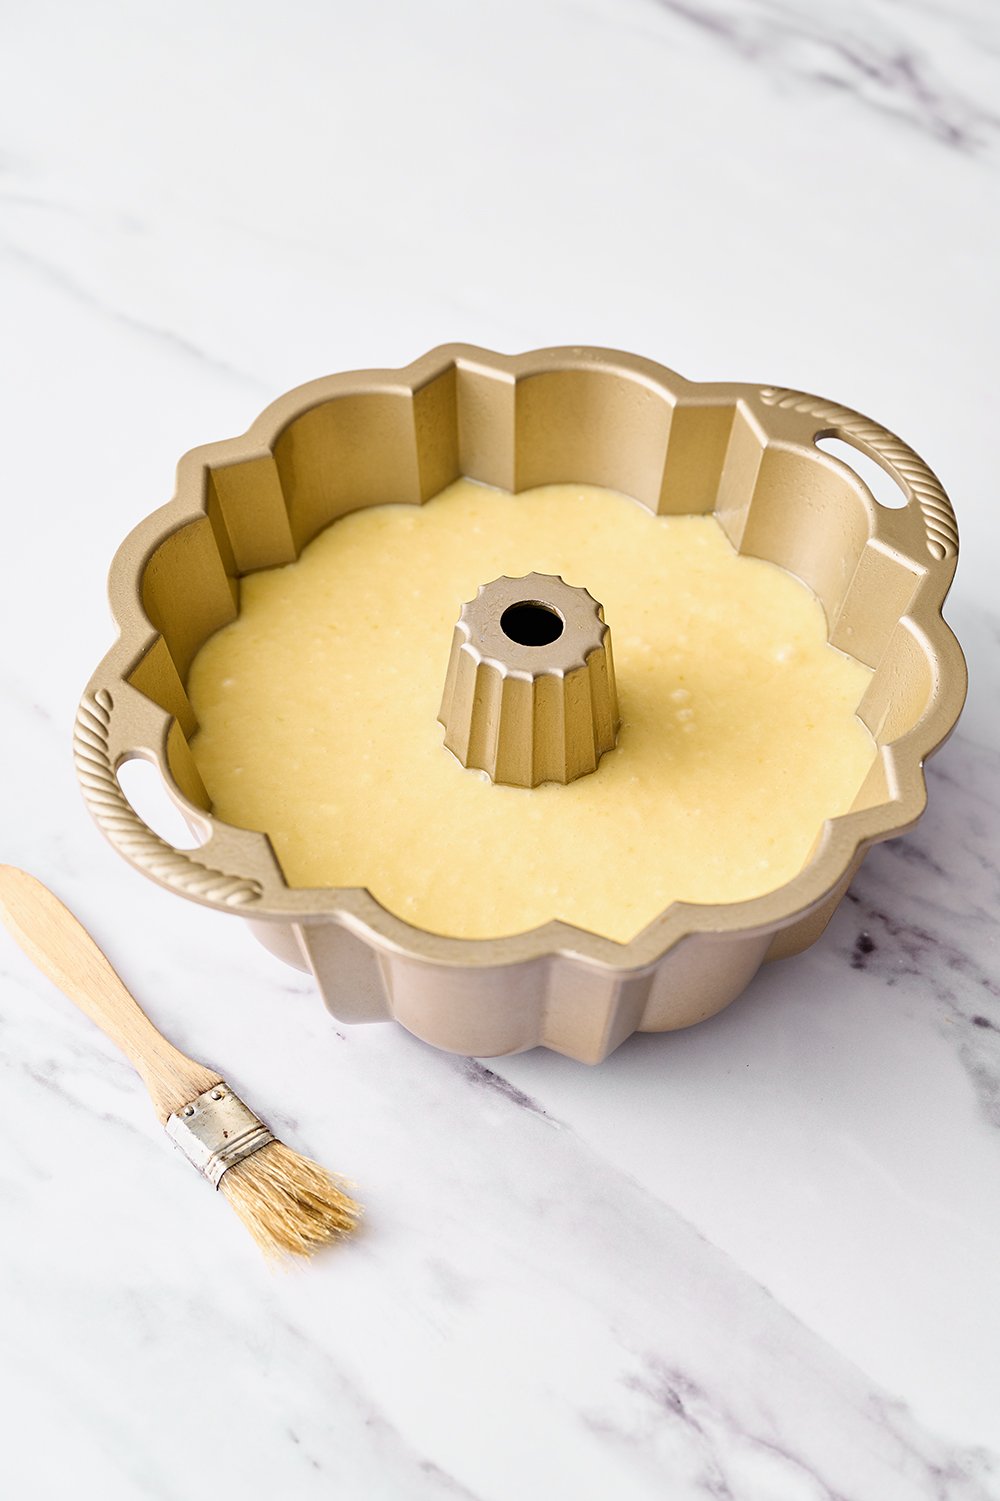 https://handletheheat.com/wp-content/uploads/2018/01/how-to-grease-a-bundt-cake-pan.jpg